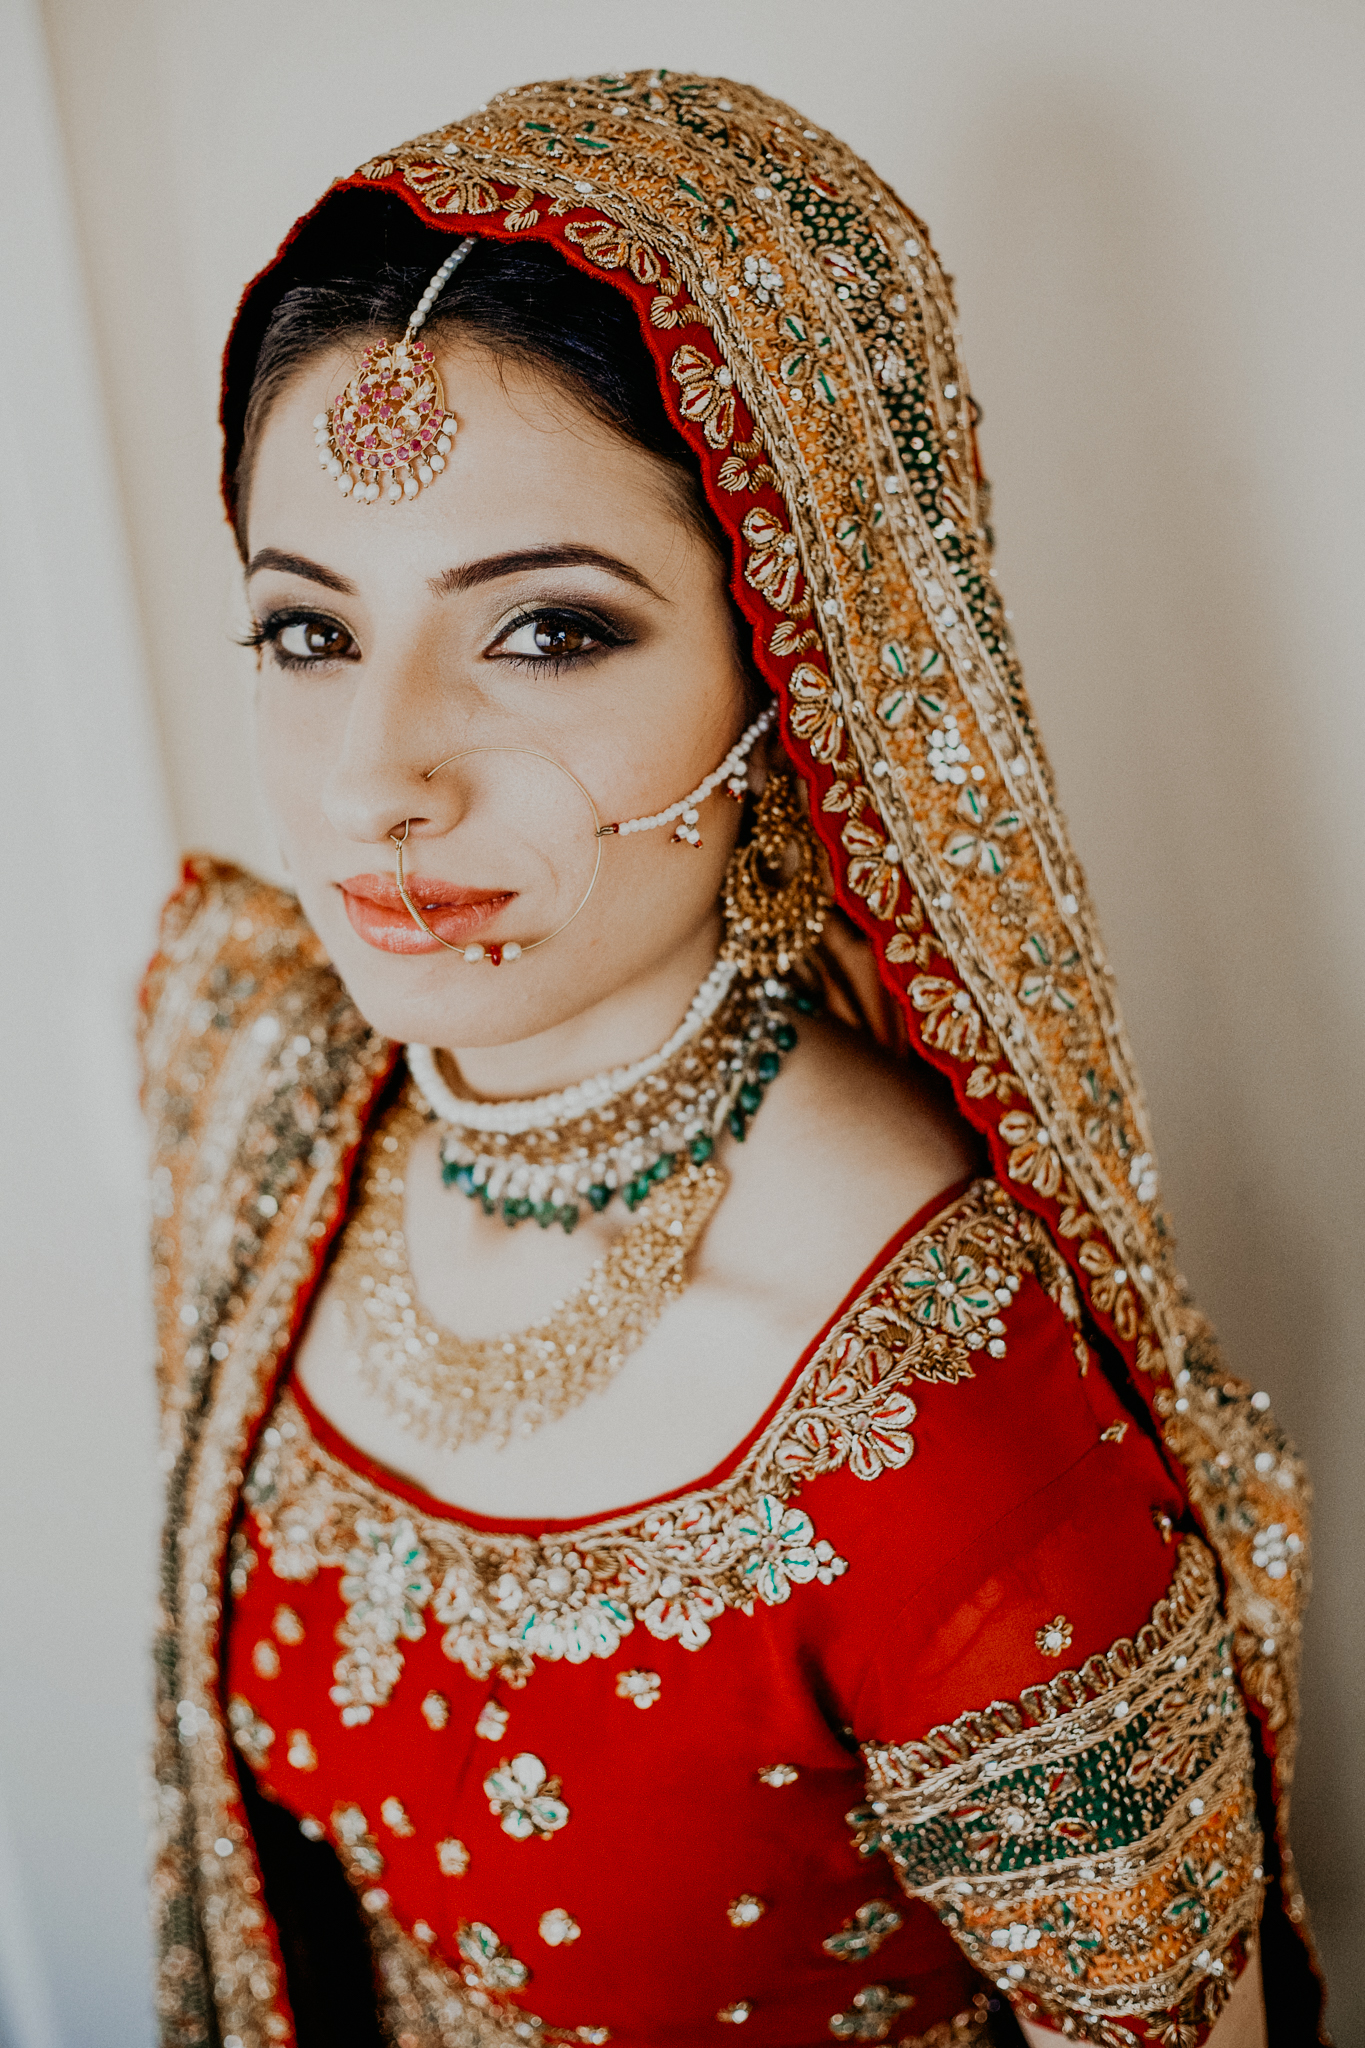 Portrait of Indian bride in red and gold dress